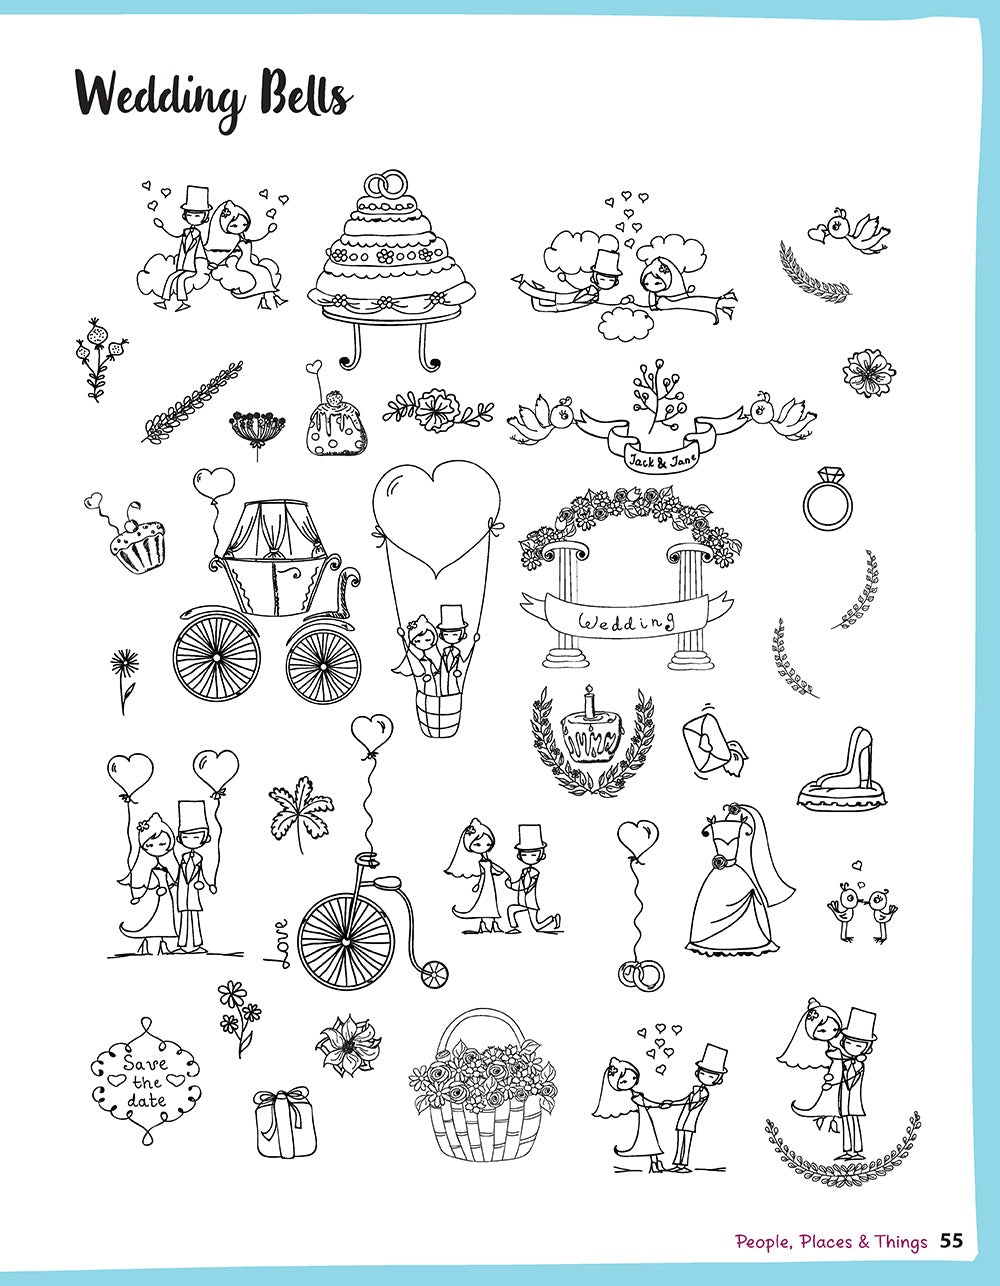 Oodles of Doodles, 2nd Edition